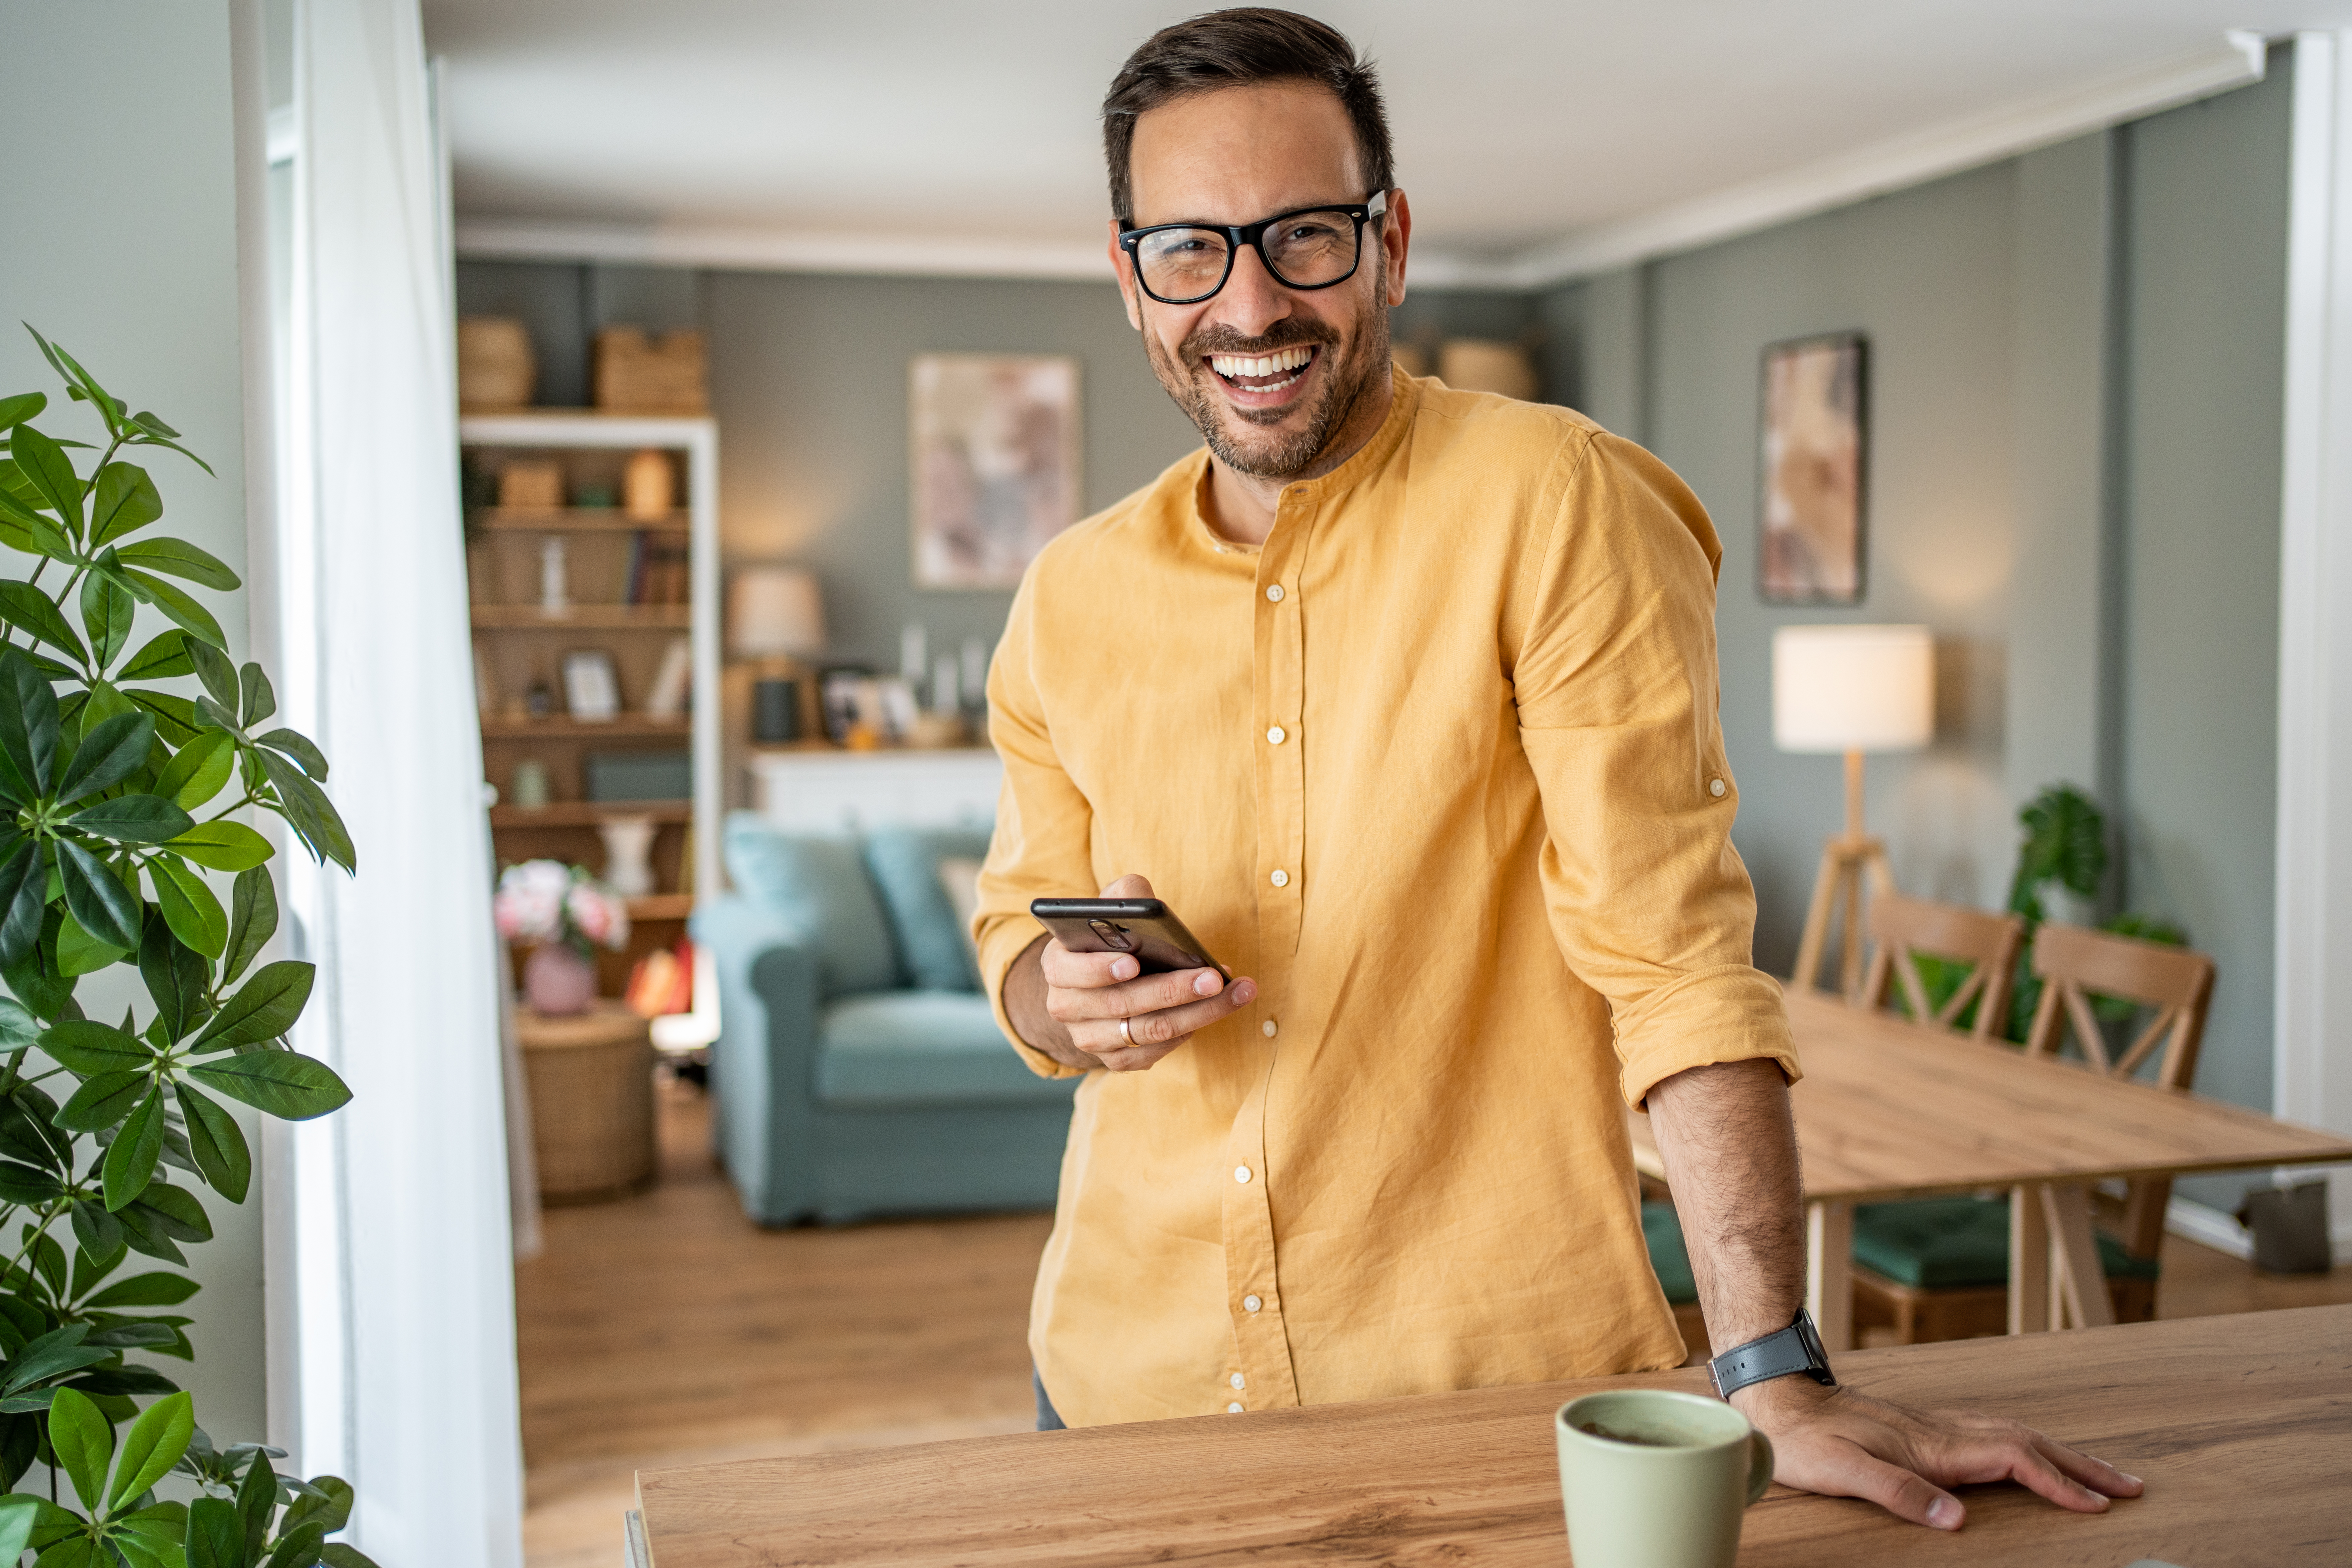 Portrait of cheerful man using smartphone at home | Source: Getty Images